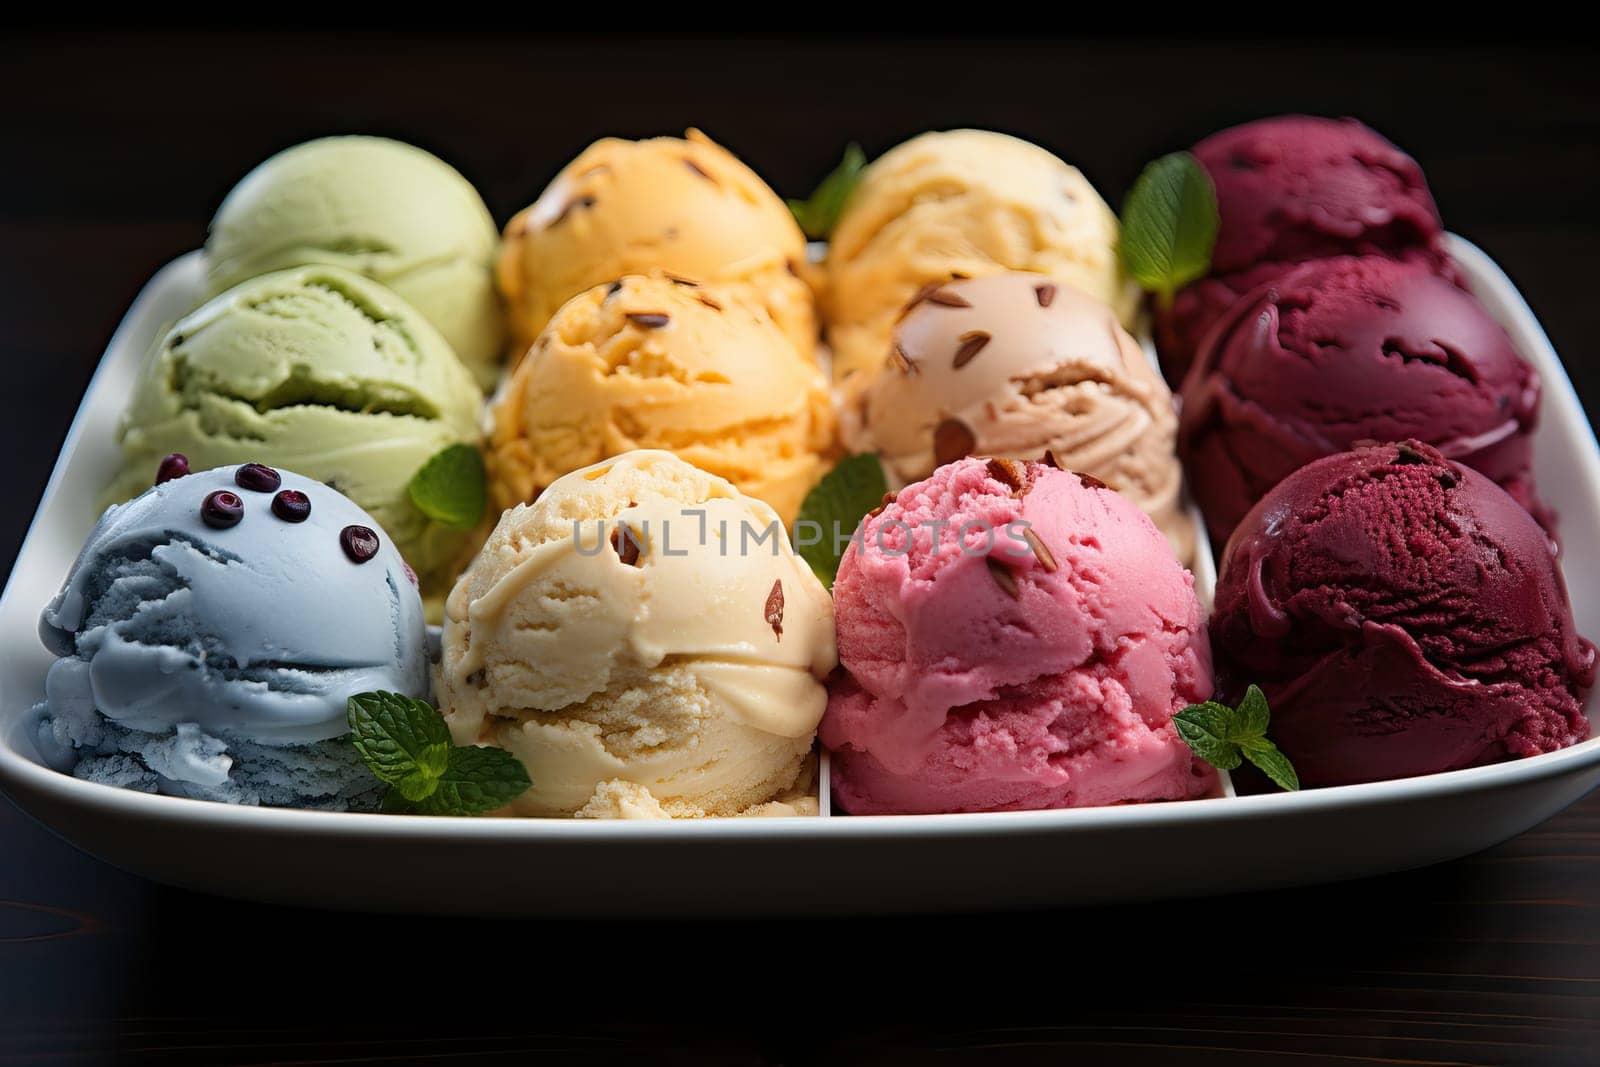 Set of colorful and different flavored ice creams on a tray, ice cream in a gelato shop close-up.